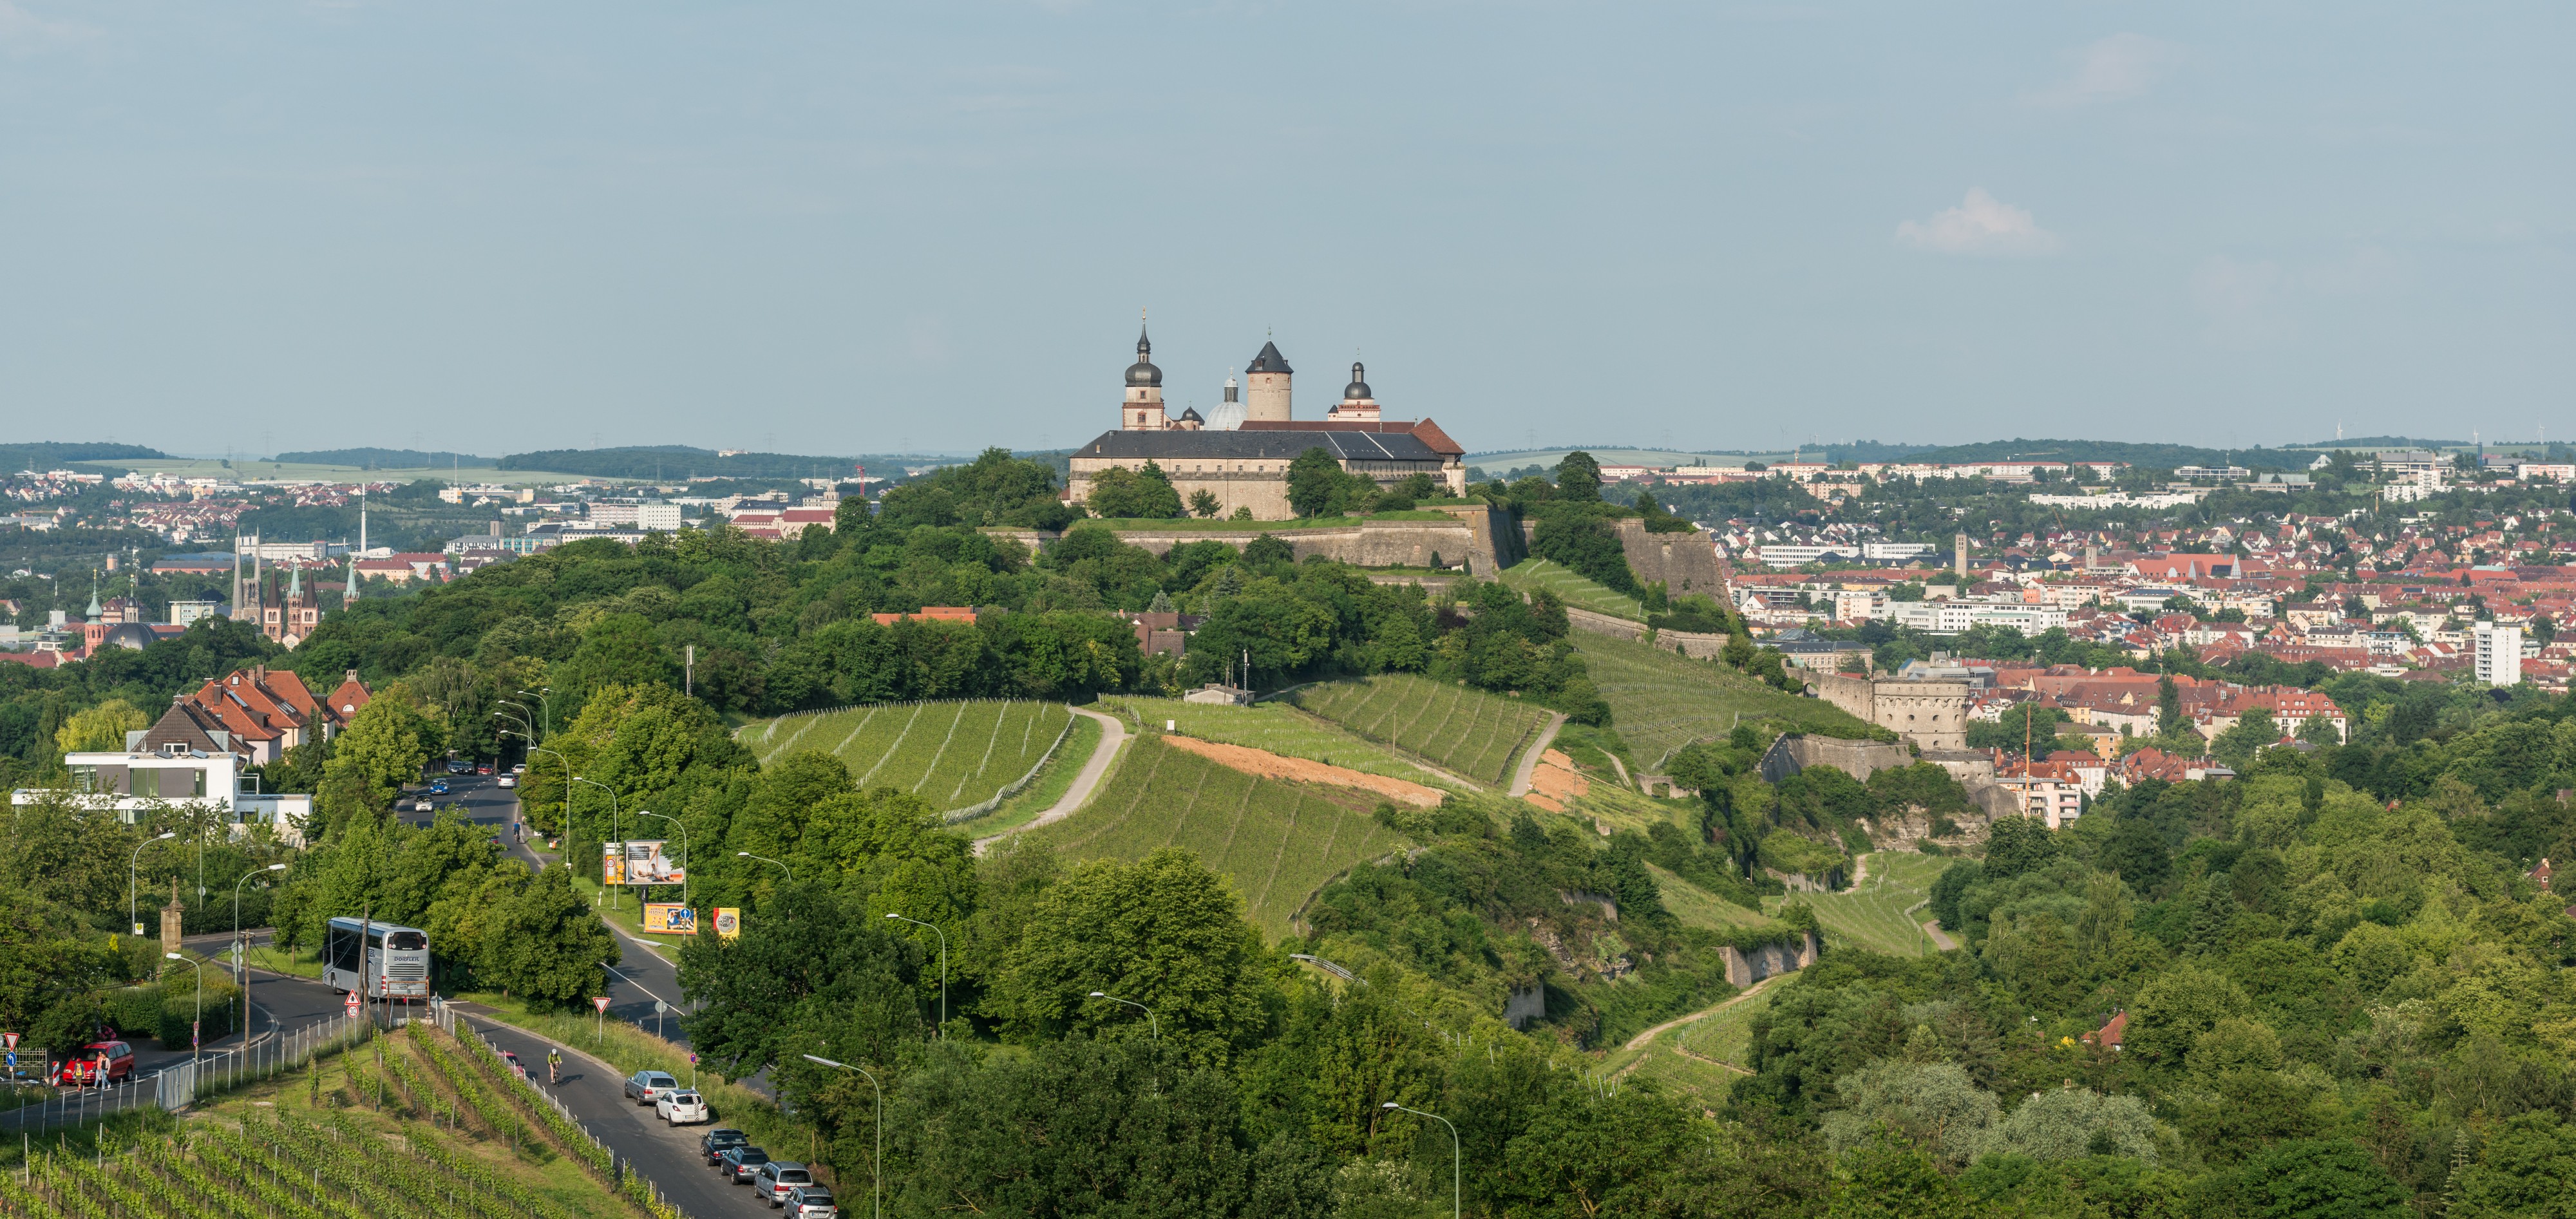 West overview of Festung Marienberg and Würzburg 20140602